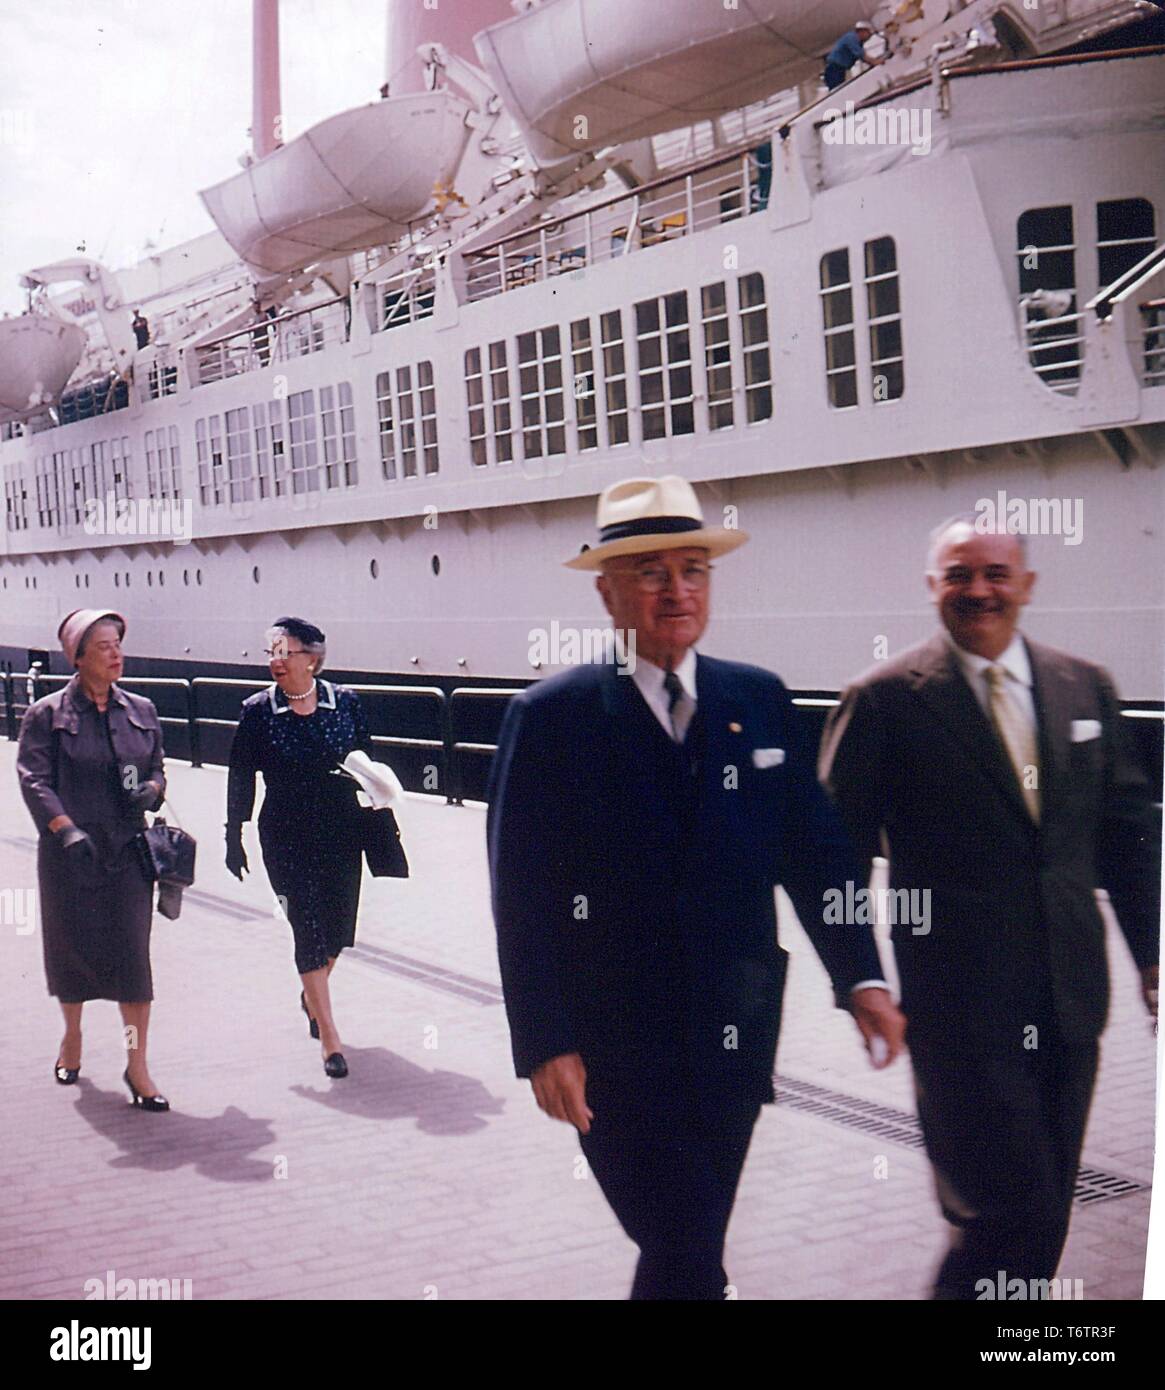 Former President Harry S. Truman, Bess Truman (first lady to President Truman), Mrs. Sam Rosenman, and an unidentified man walking on a pier with a boat in the background at Naples, Florida, June, 1958. Image courtesy National Archives. () Stock Photo